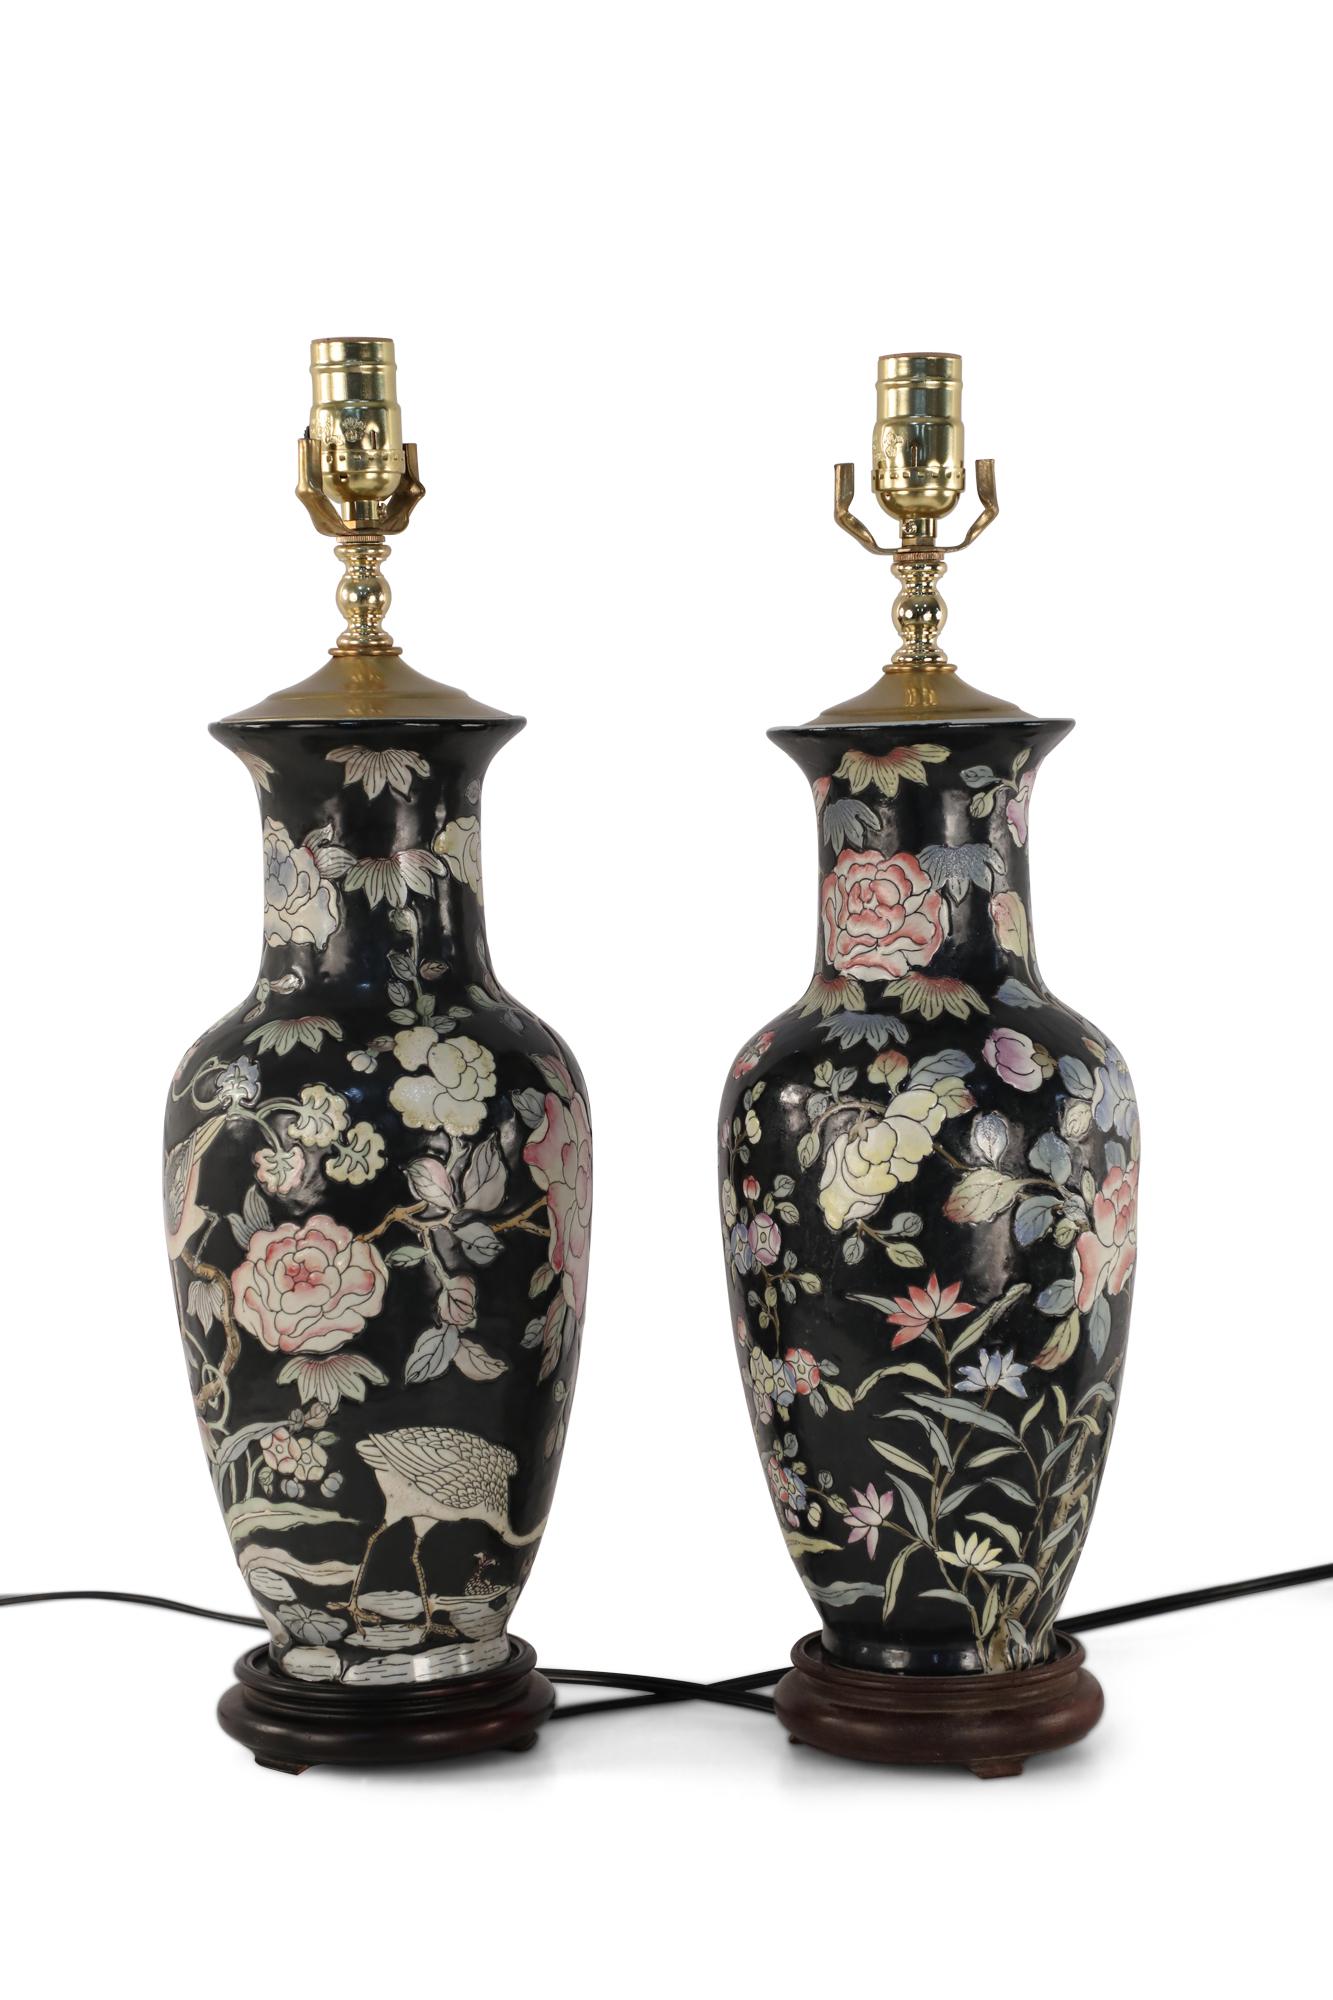 Pair of Chinese Black and Floral Motif Table Lamps In Good Condition For Sale In New York, NY